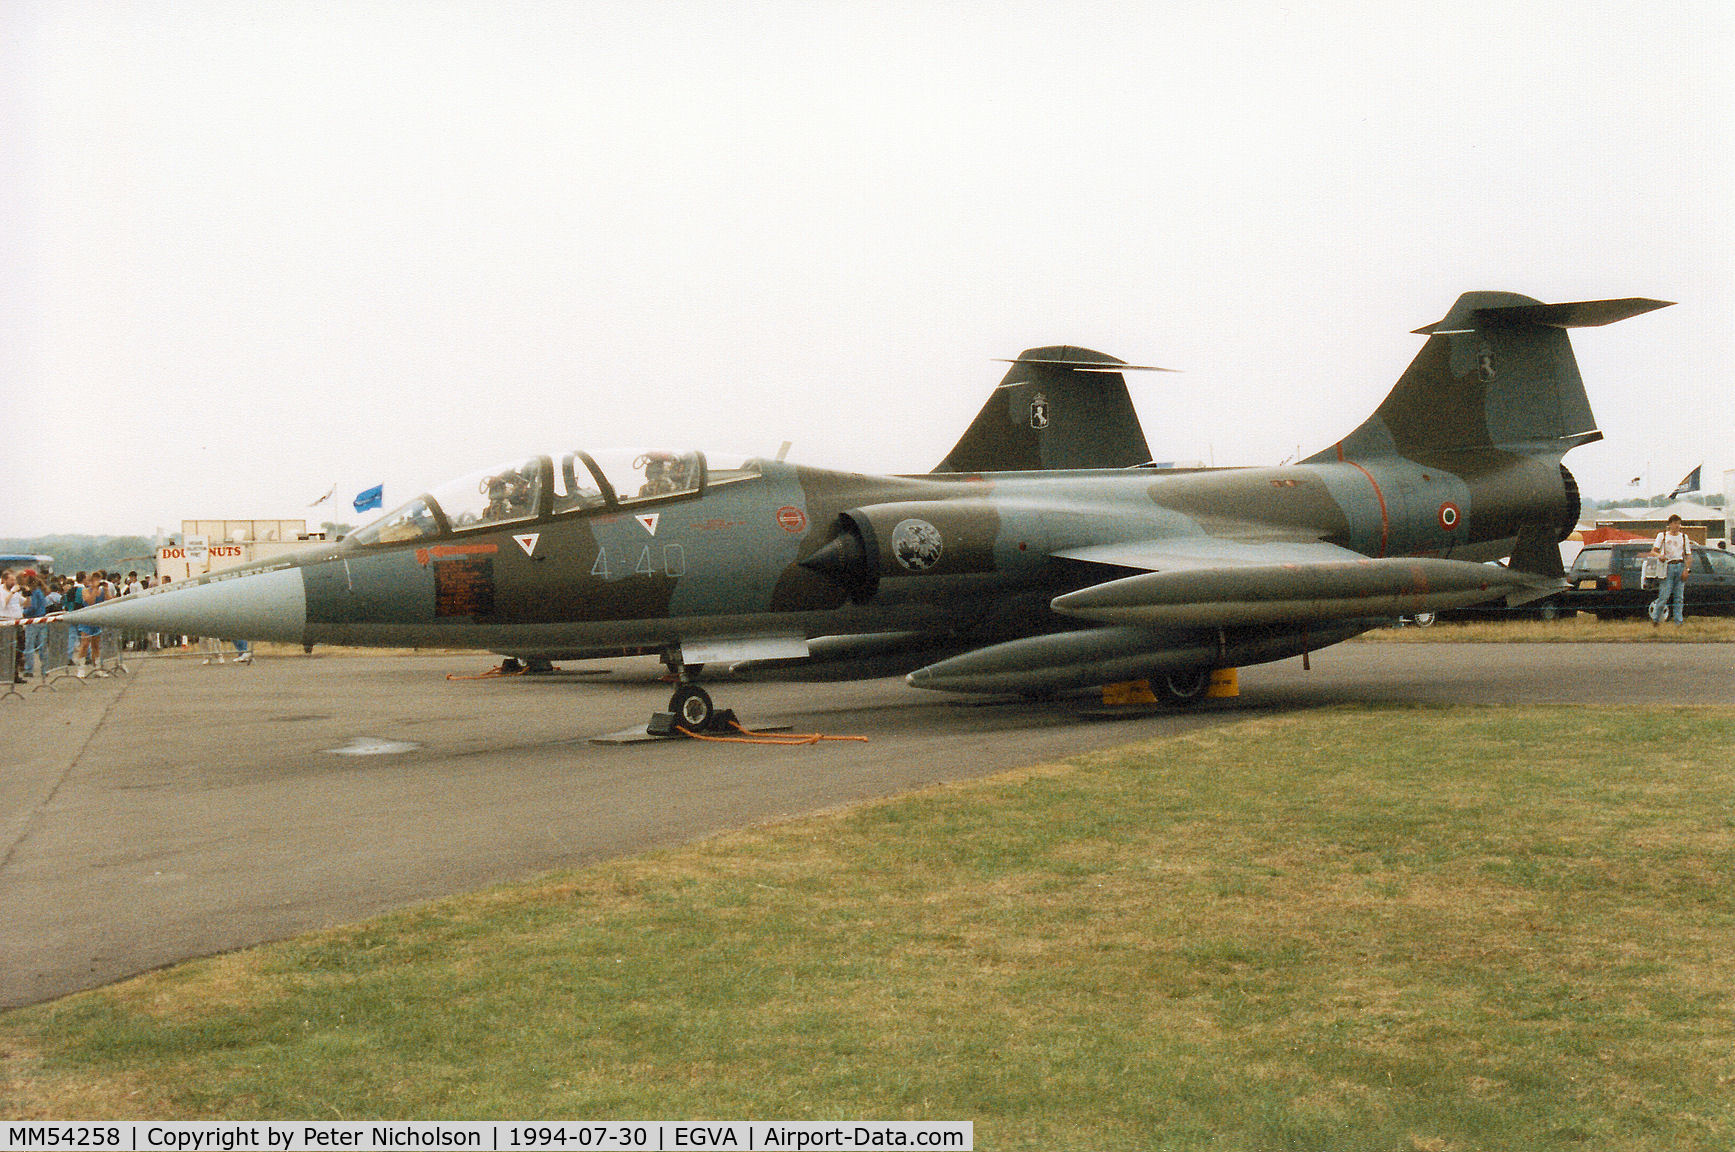 MM54258, 1969 Lockheed TF-104G Starfighter C/N 583H-5209, Another view of the 4 Stormo TF-104G Starfighter on display at the 1994 Intnl Air Tattoo at RAF Fairford.